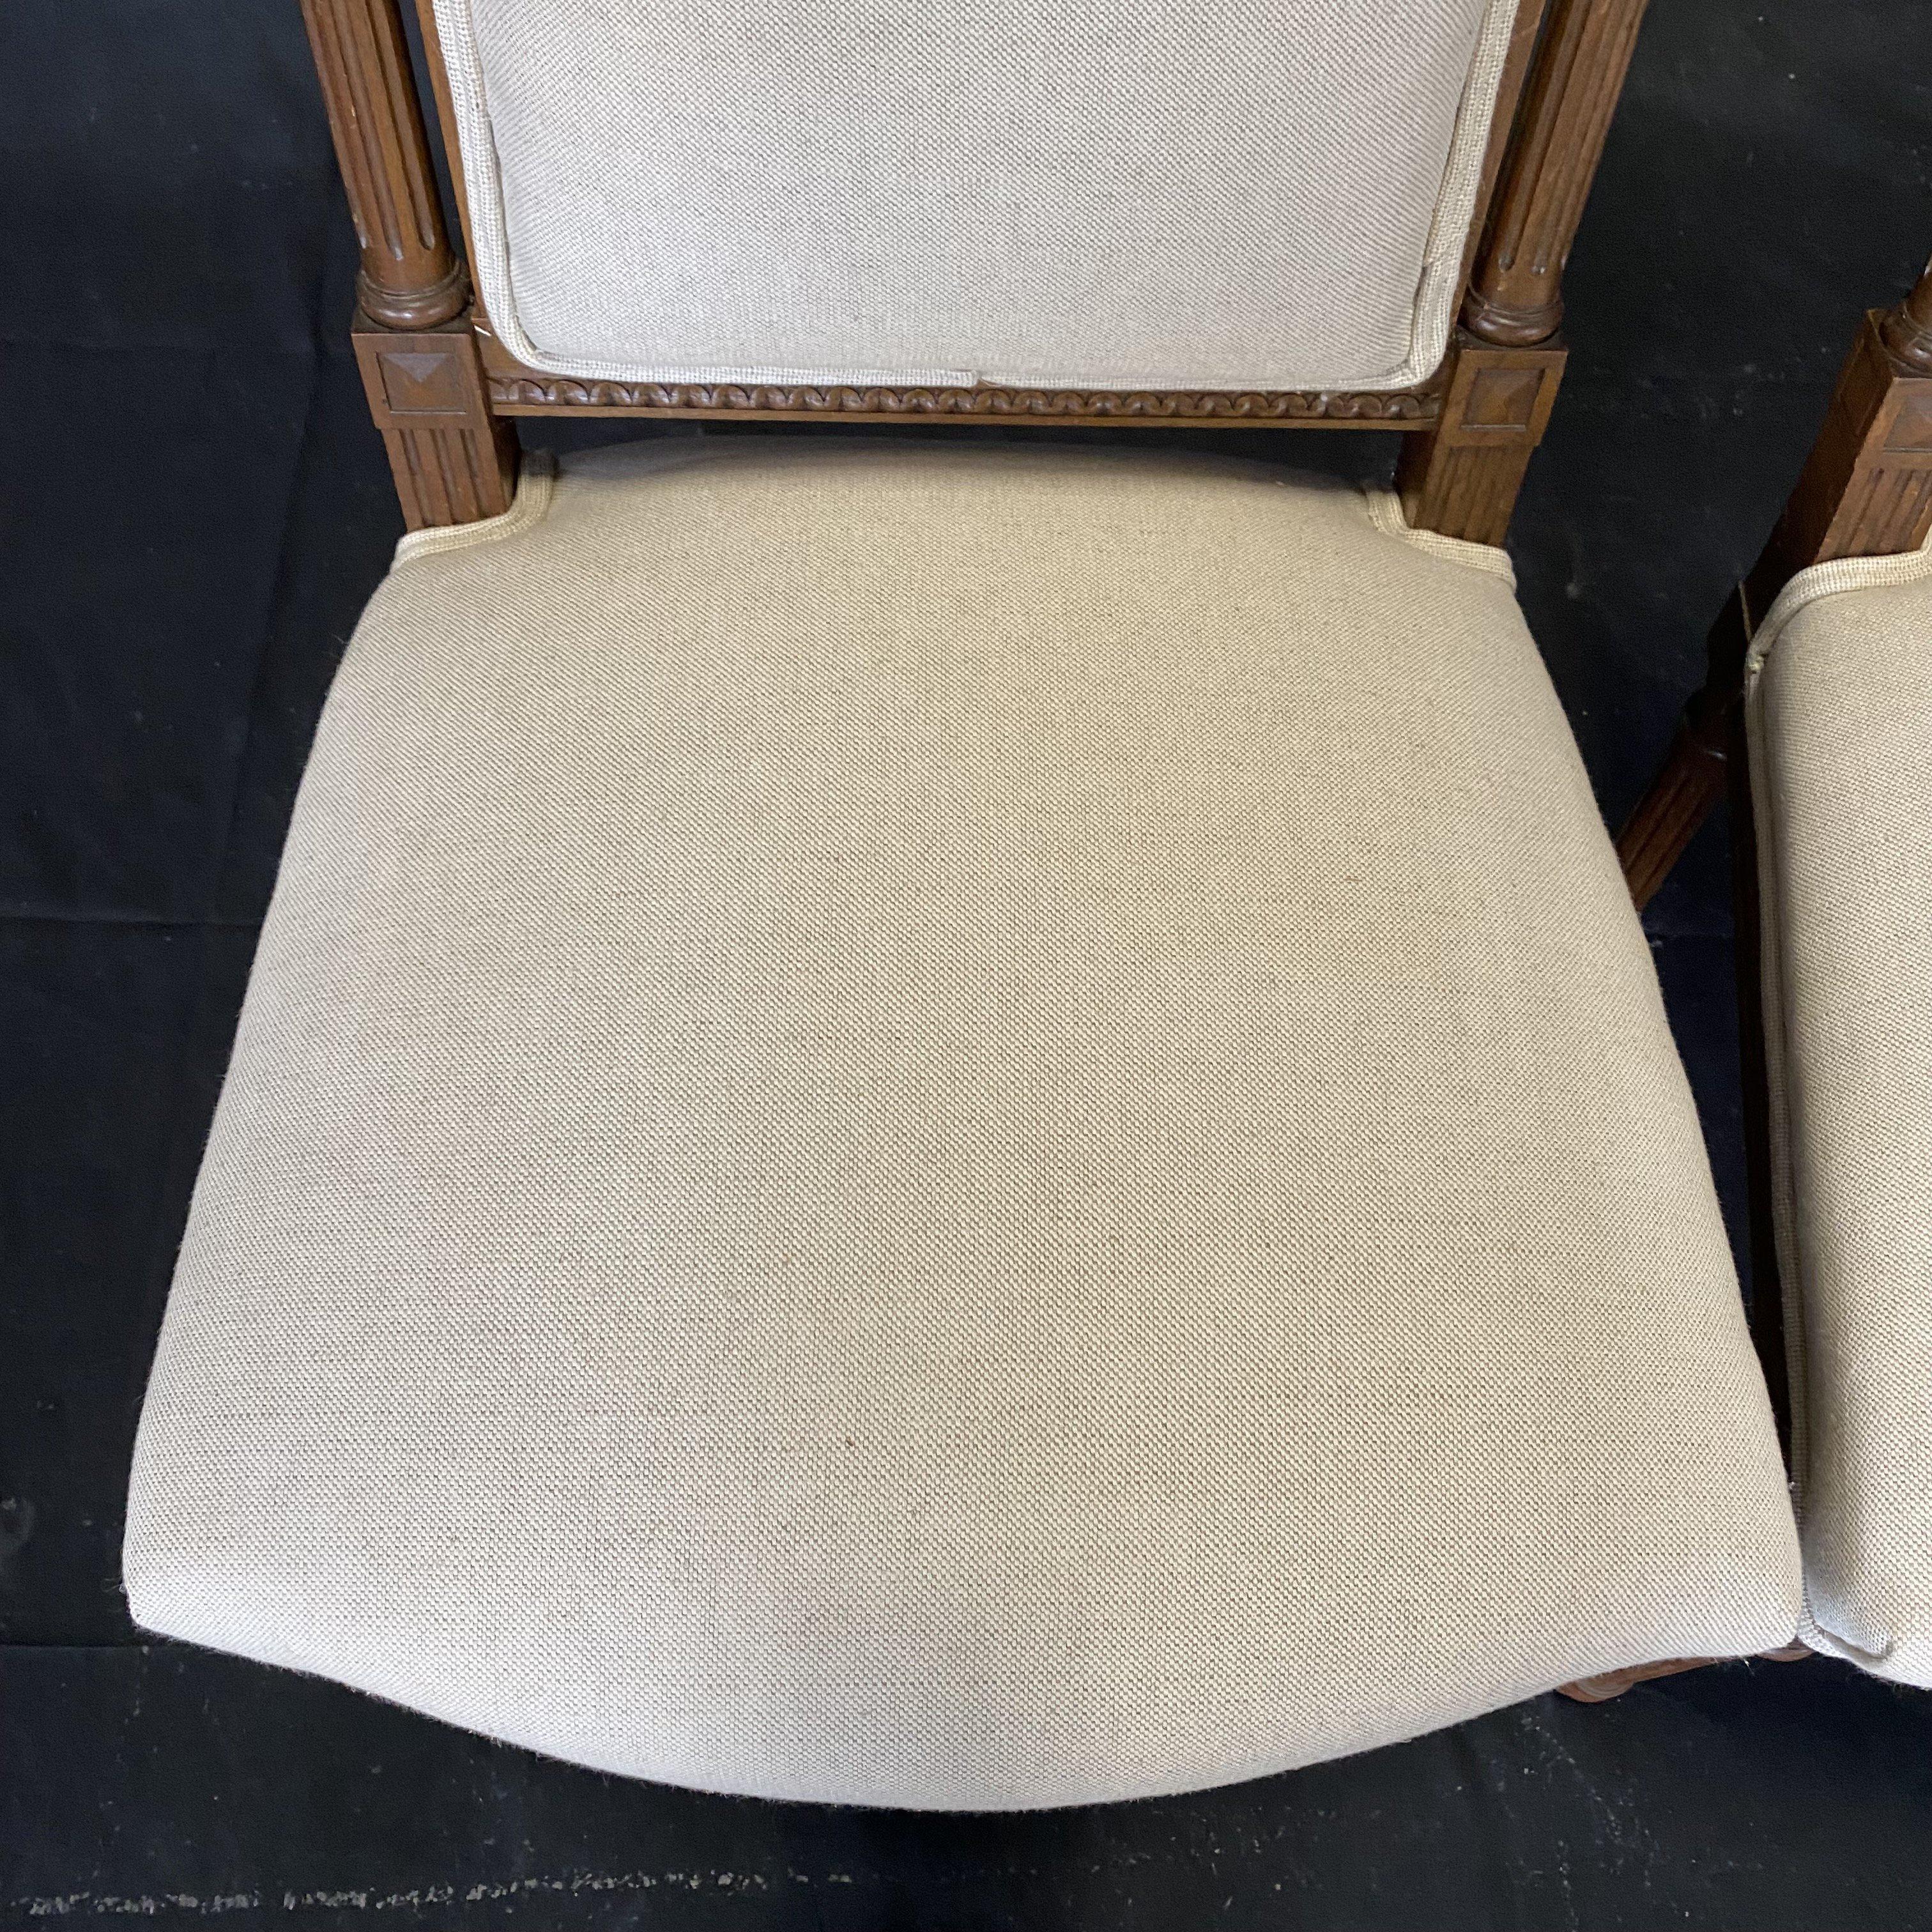 Lovely pair of French side chairs bought in Lyon, France and shipped to the US, where we have reupholstered them in a neutral high quality British linen cotton blend fabric, to highlight the exquisite carving on each chair. The crossed victory